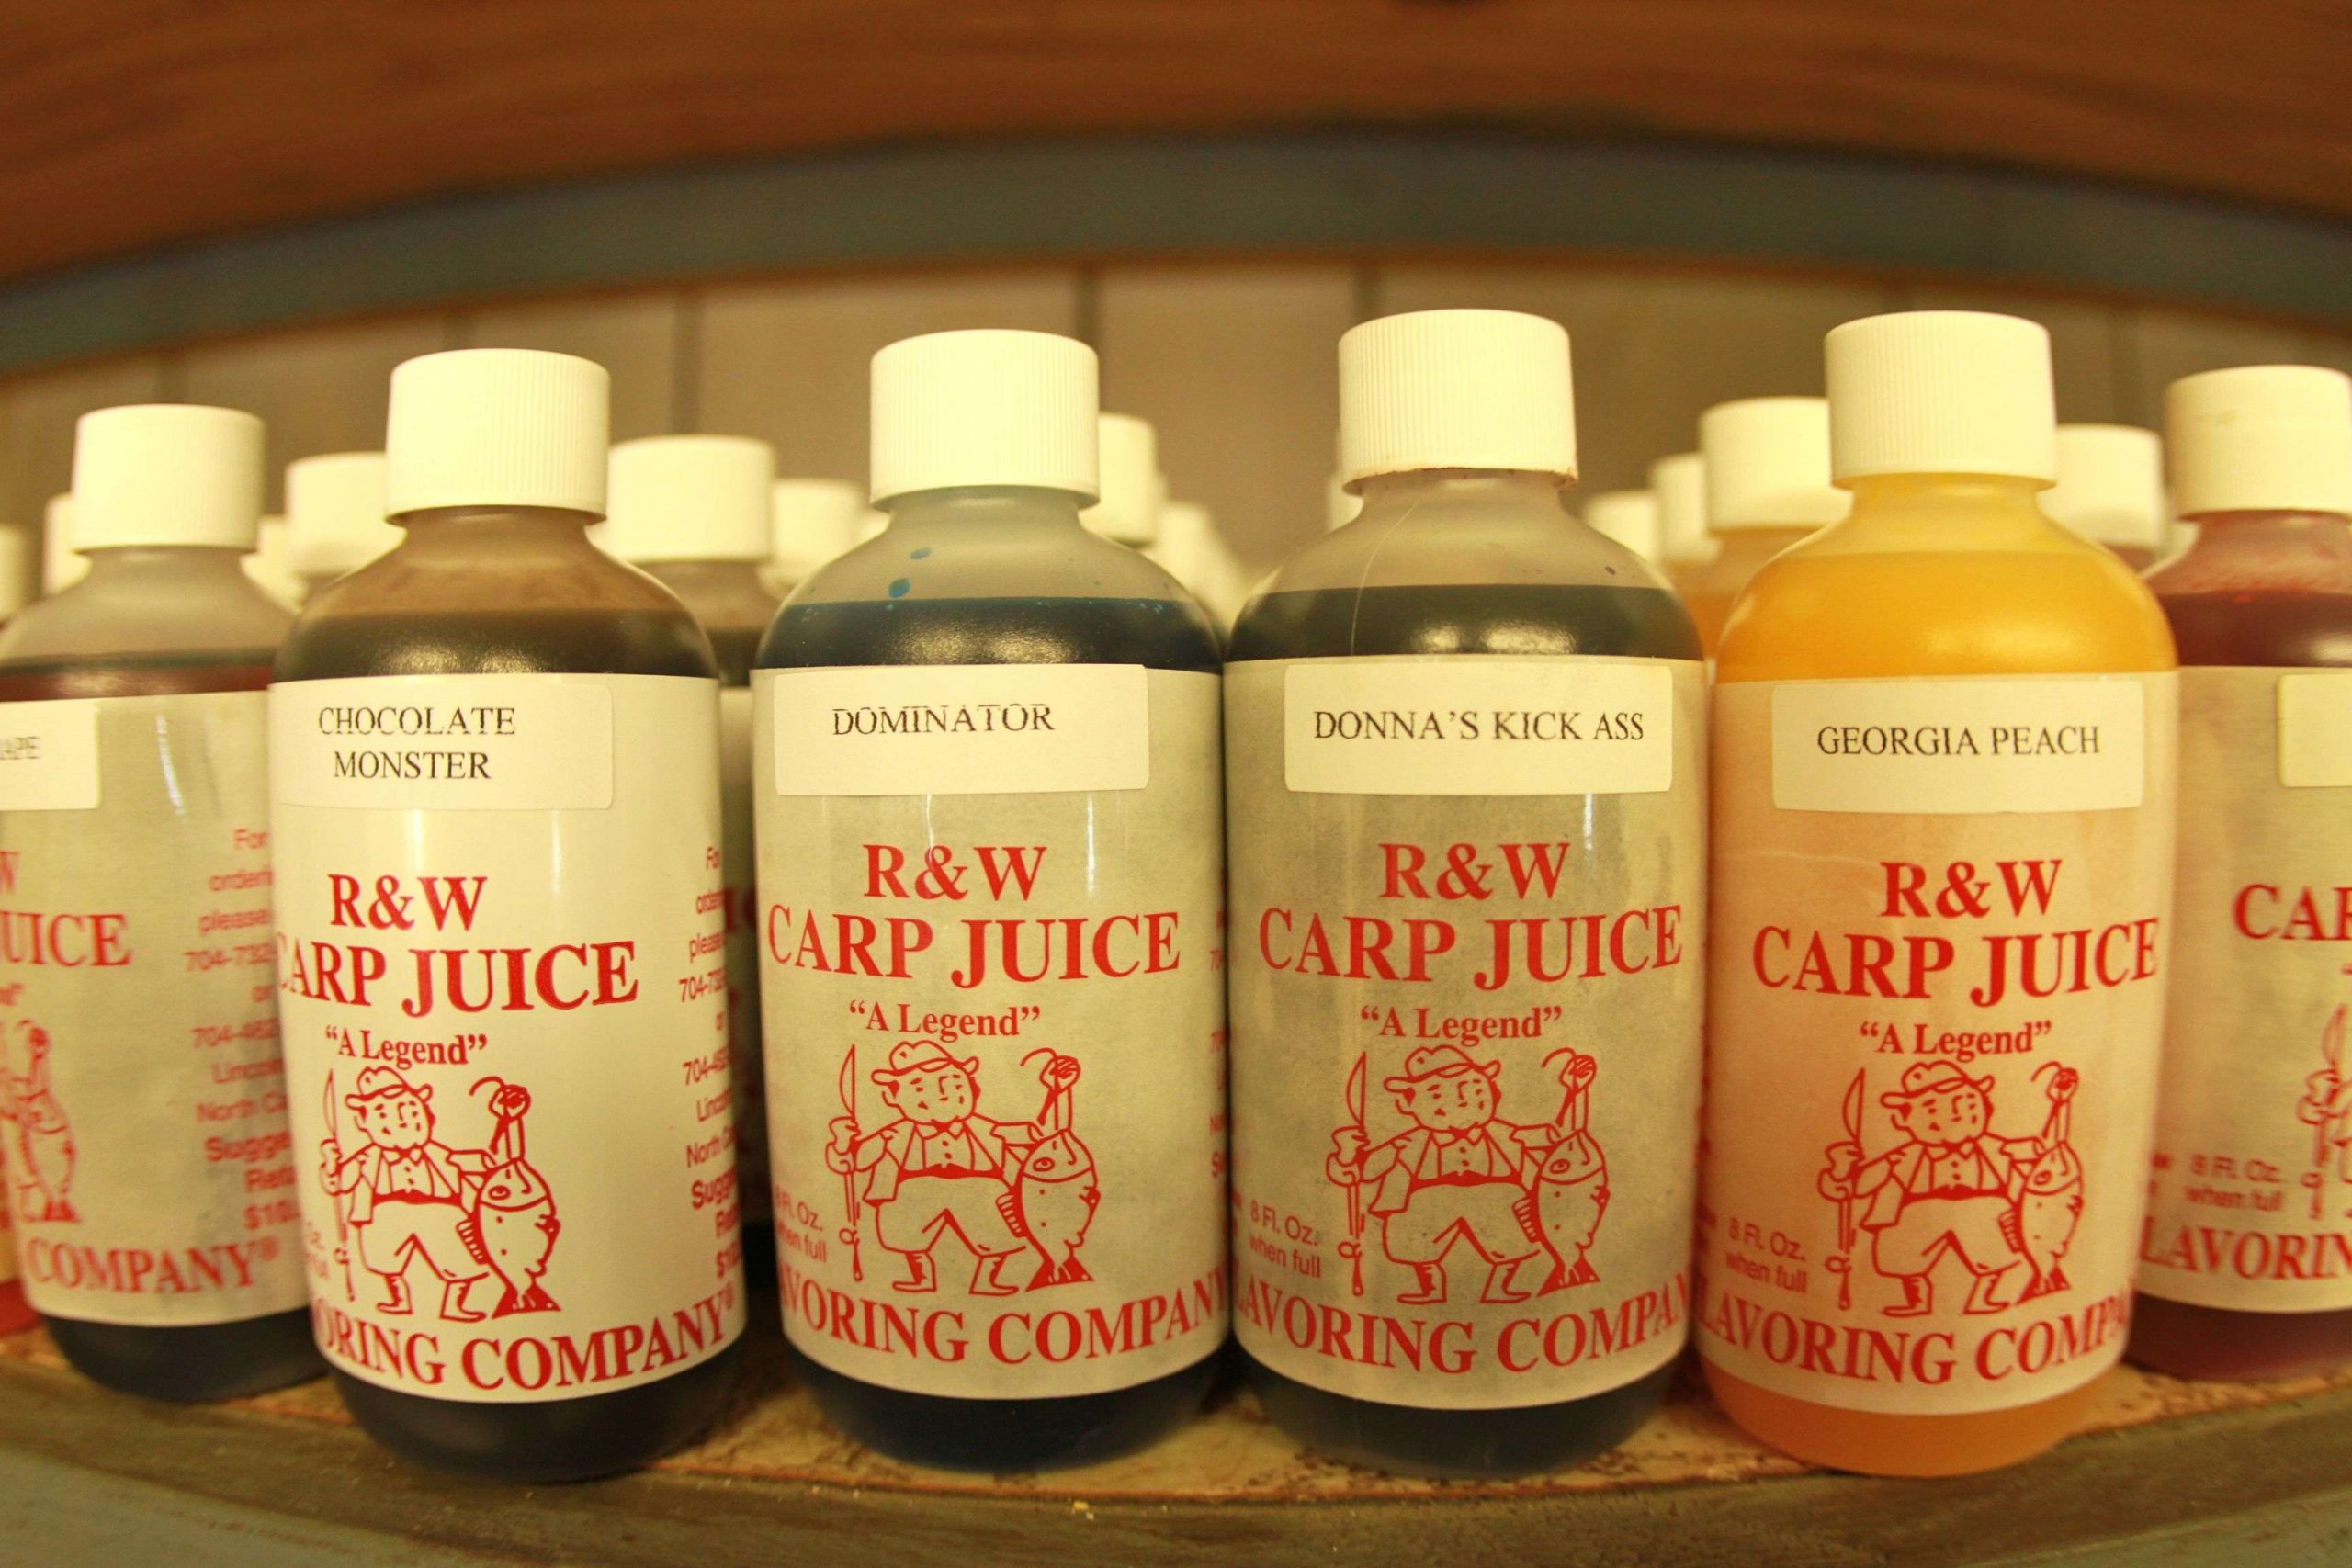 R&W Carp Juice Flavoring is one of the most popular products for attracting carp.